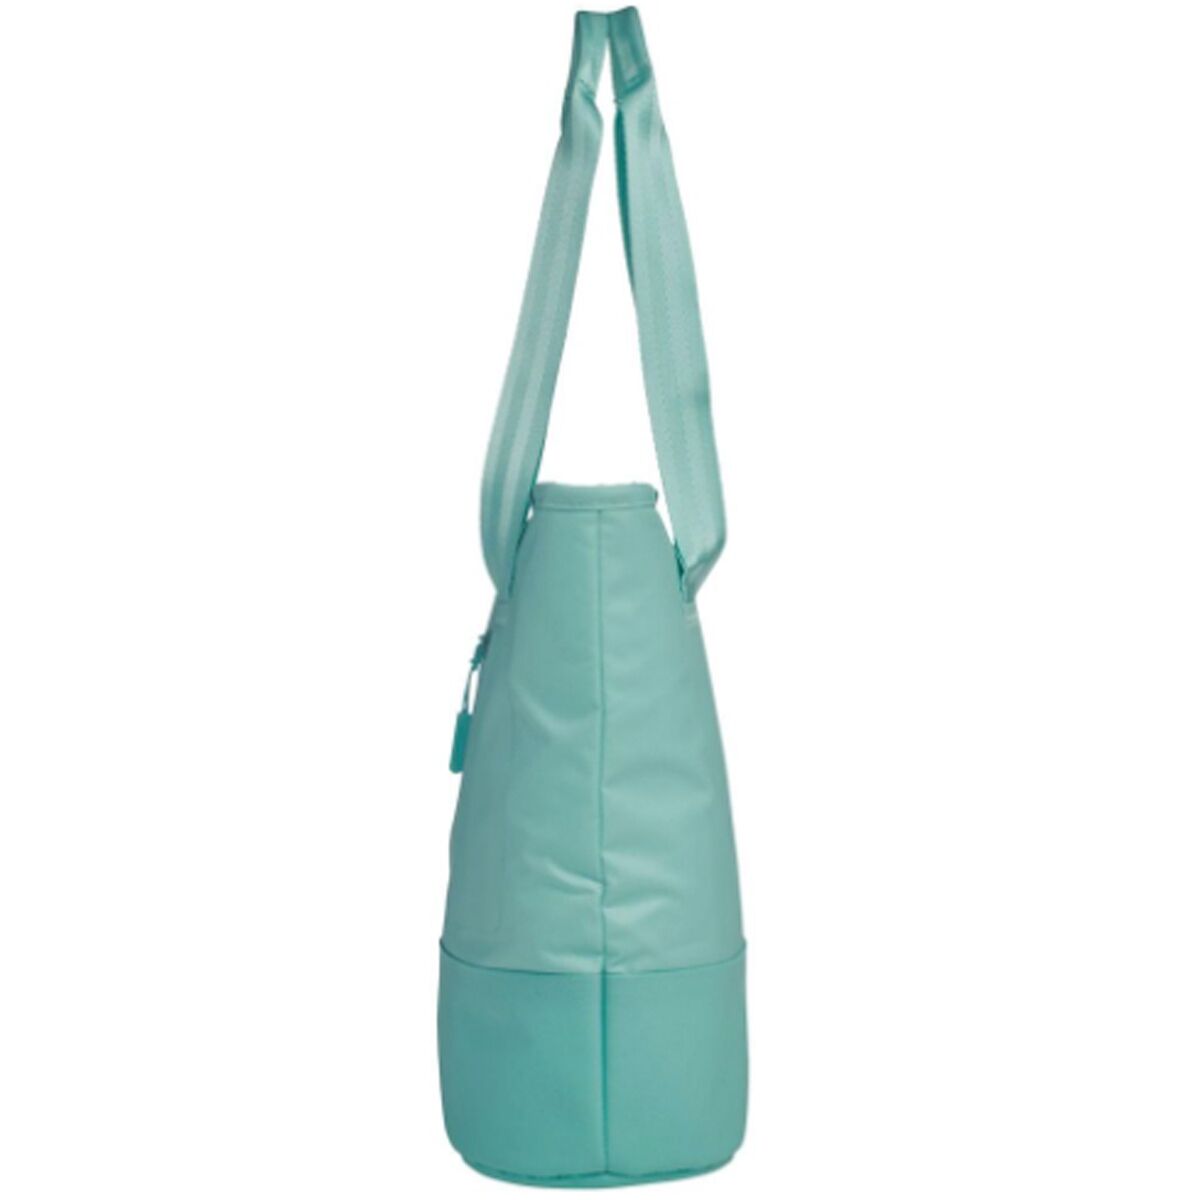  Hydro Flask 8L Lunch Tote - Hike & Camp